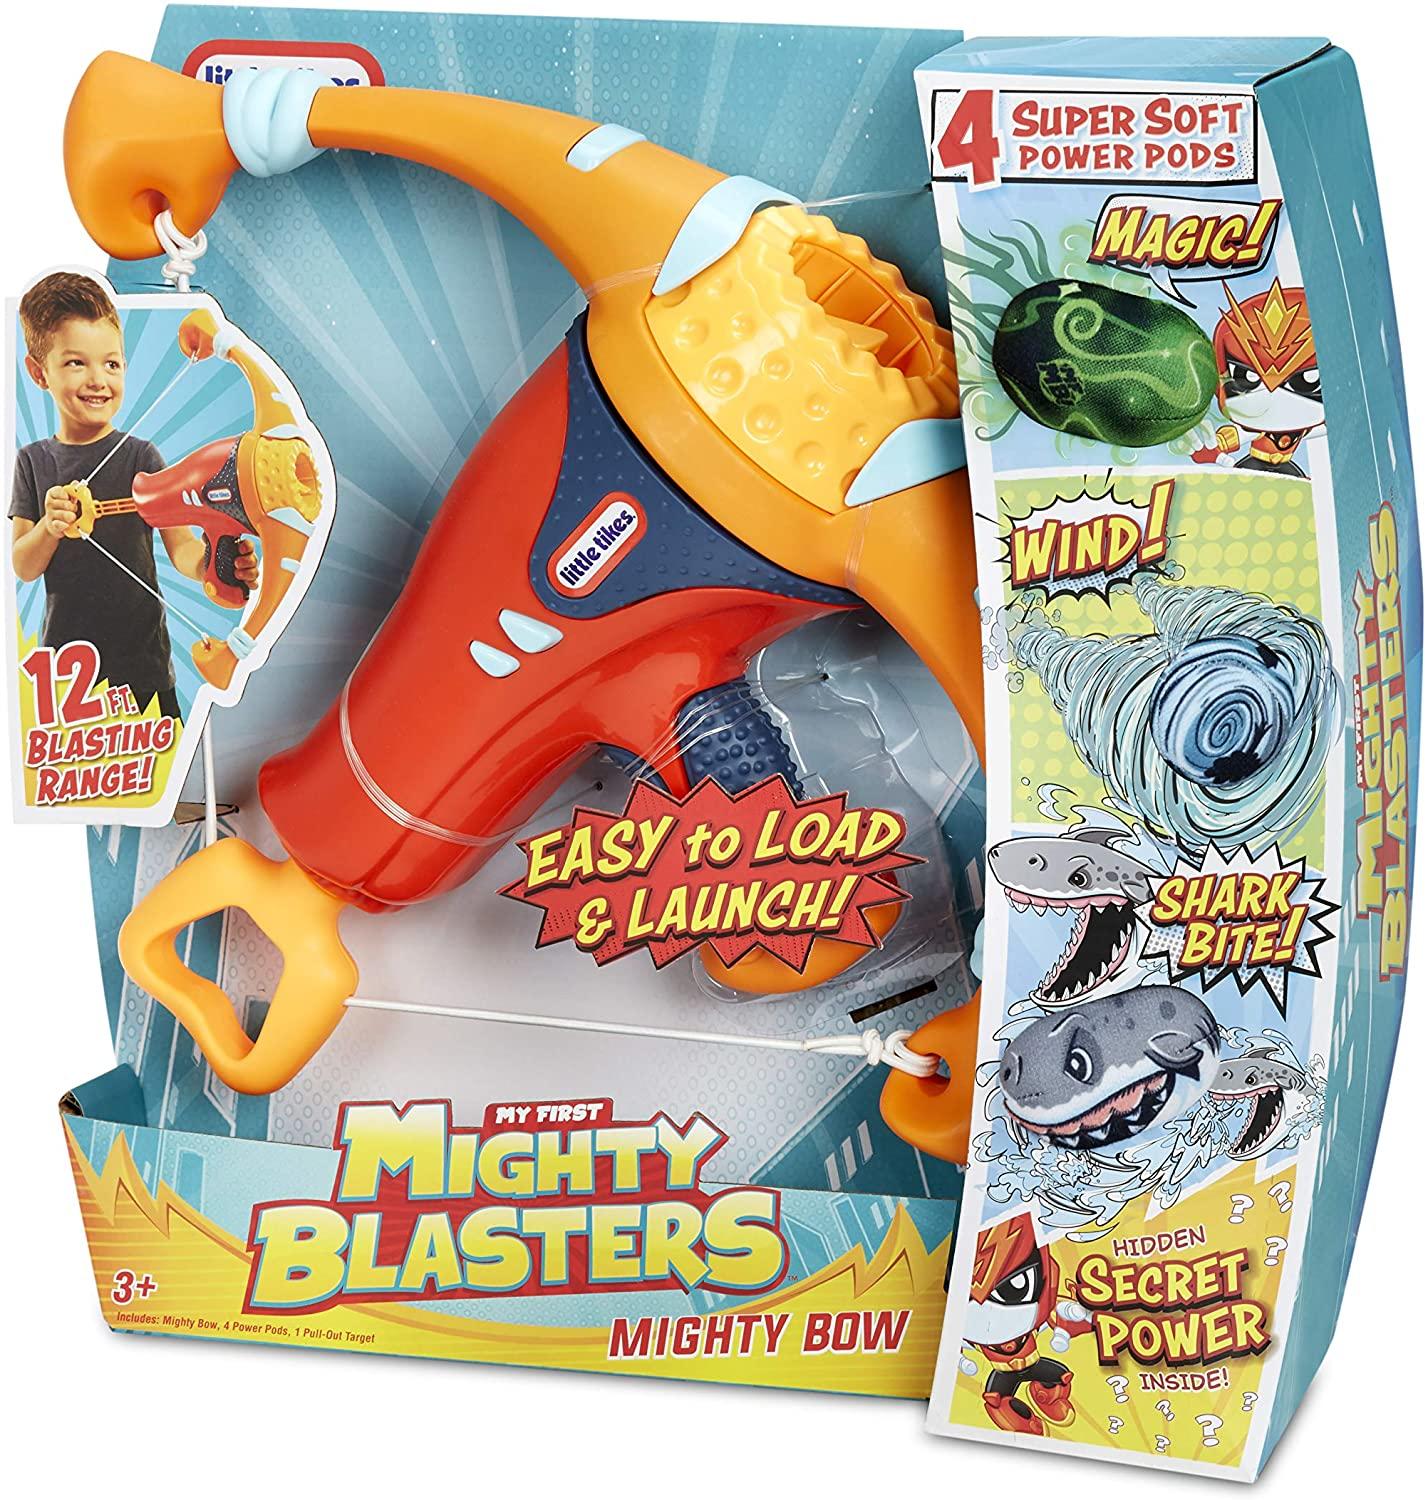 Little Tikes My First Mighty Blaster Mighty Bow Toymaster Ballina